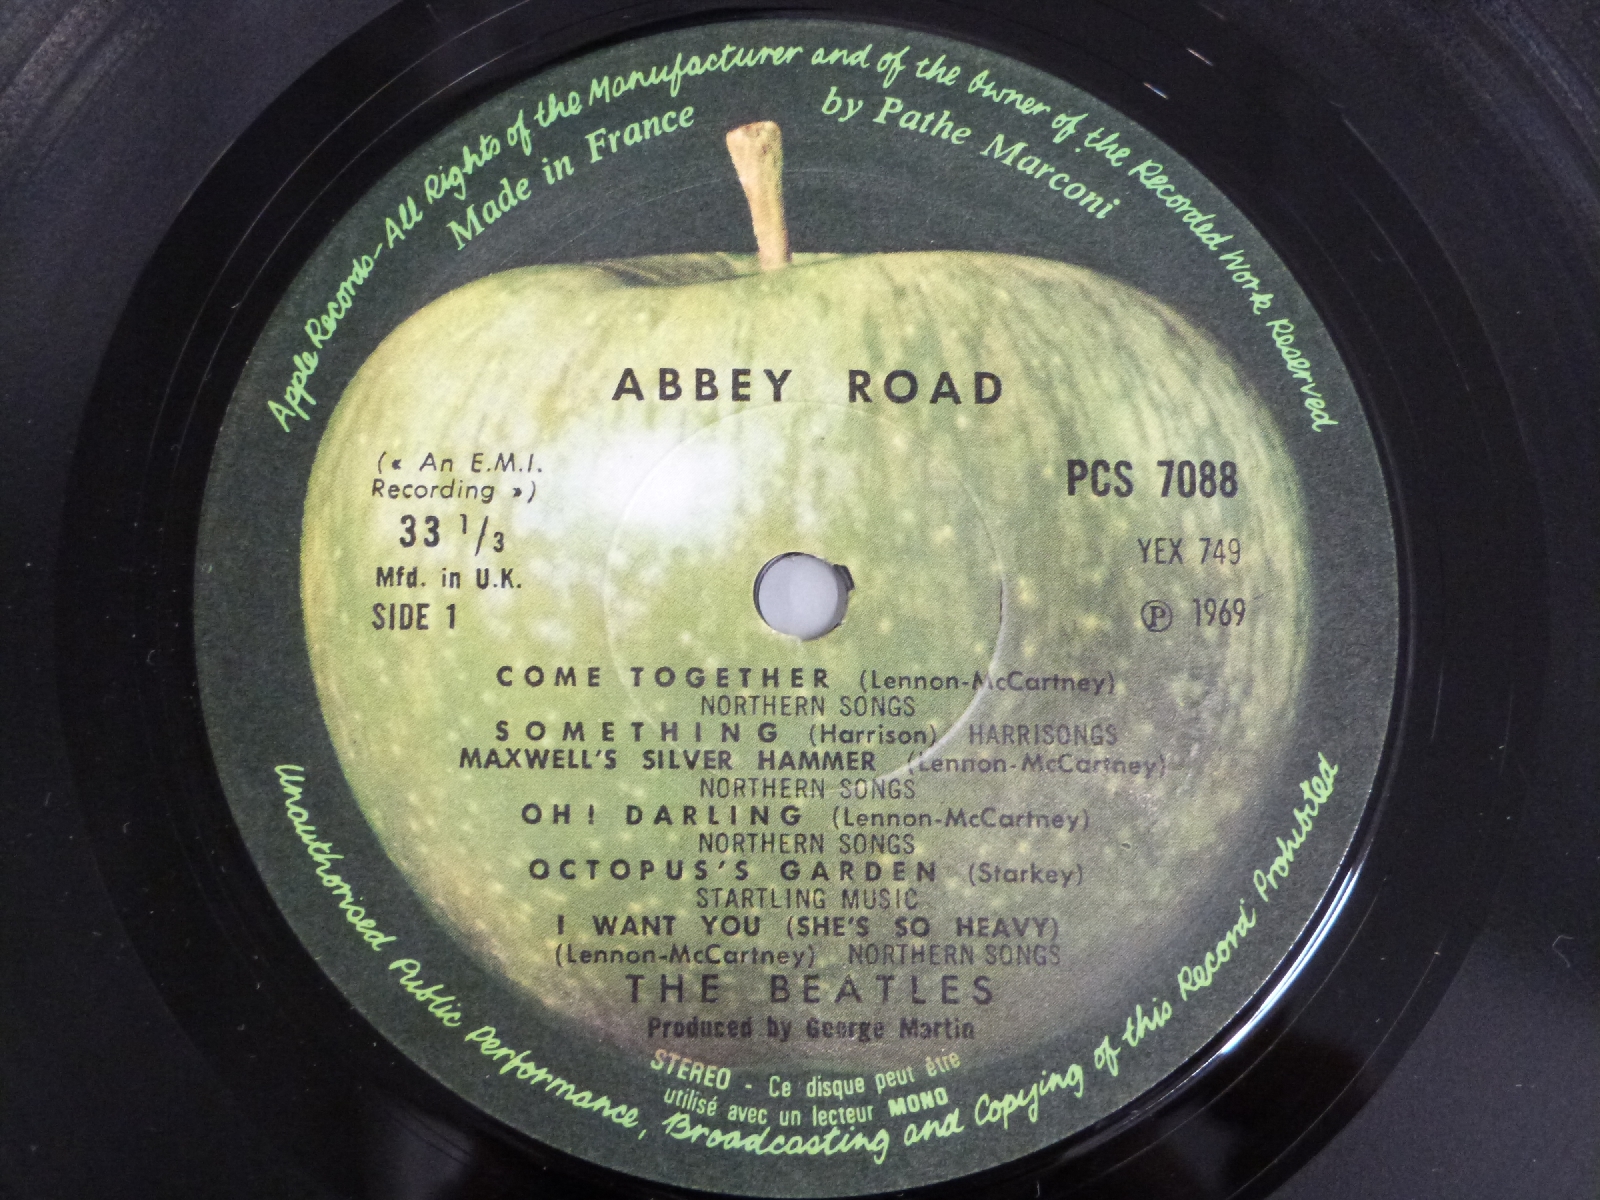 The Beatles - Abbey Road (PCS7088), three copies, all appear VG/Ex - Image 3 of 3